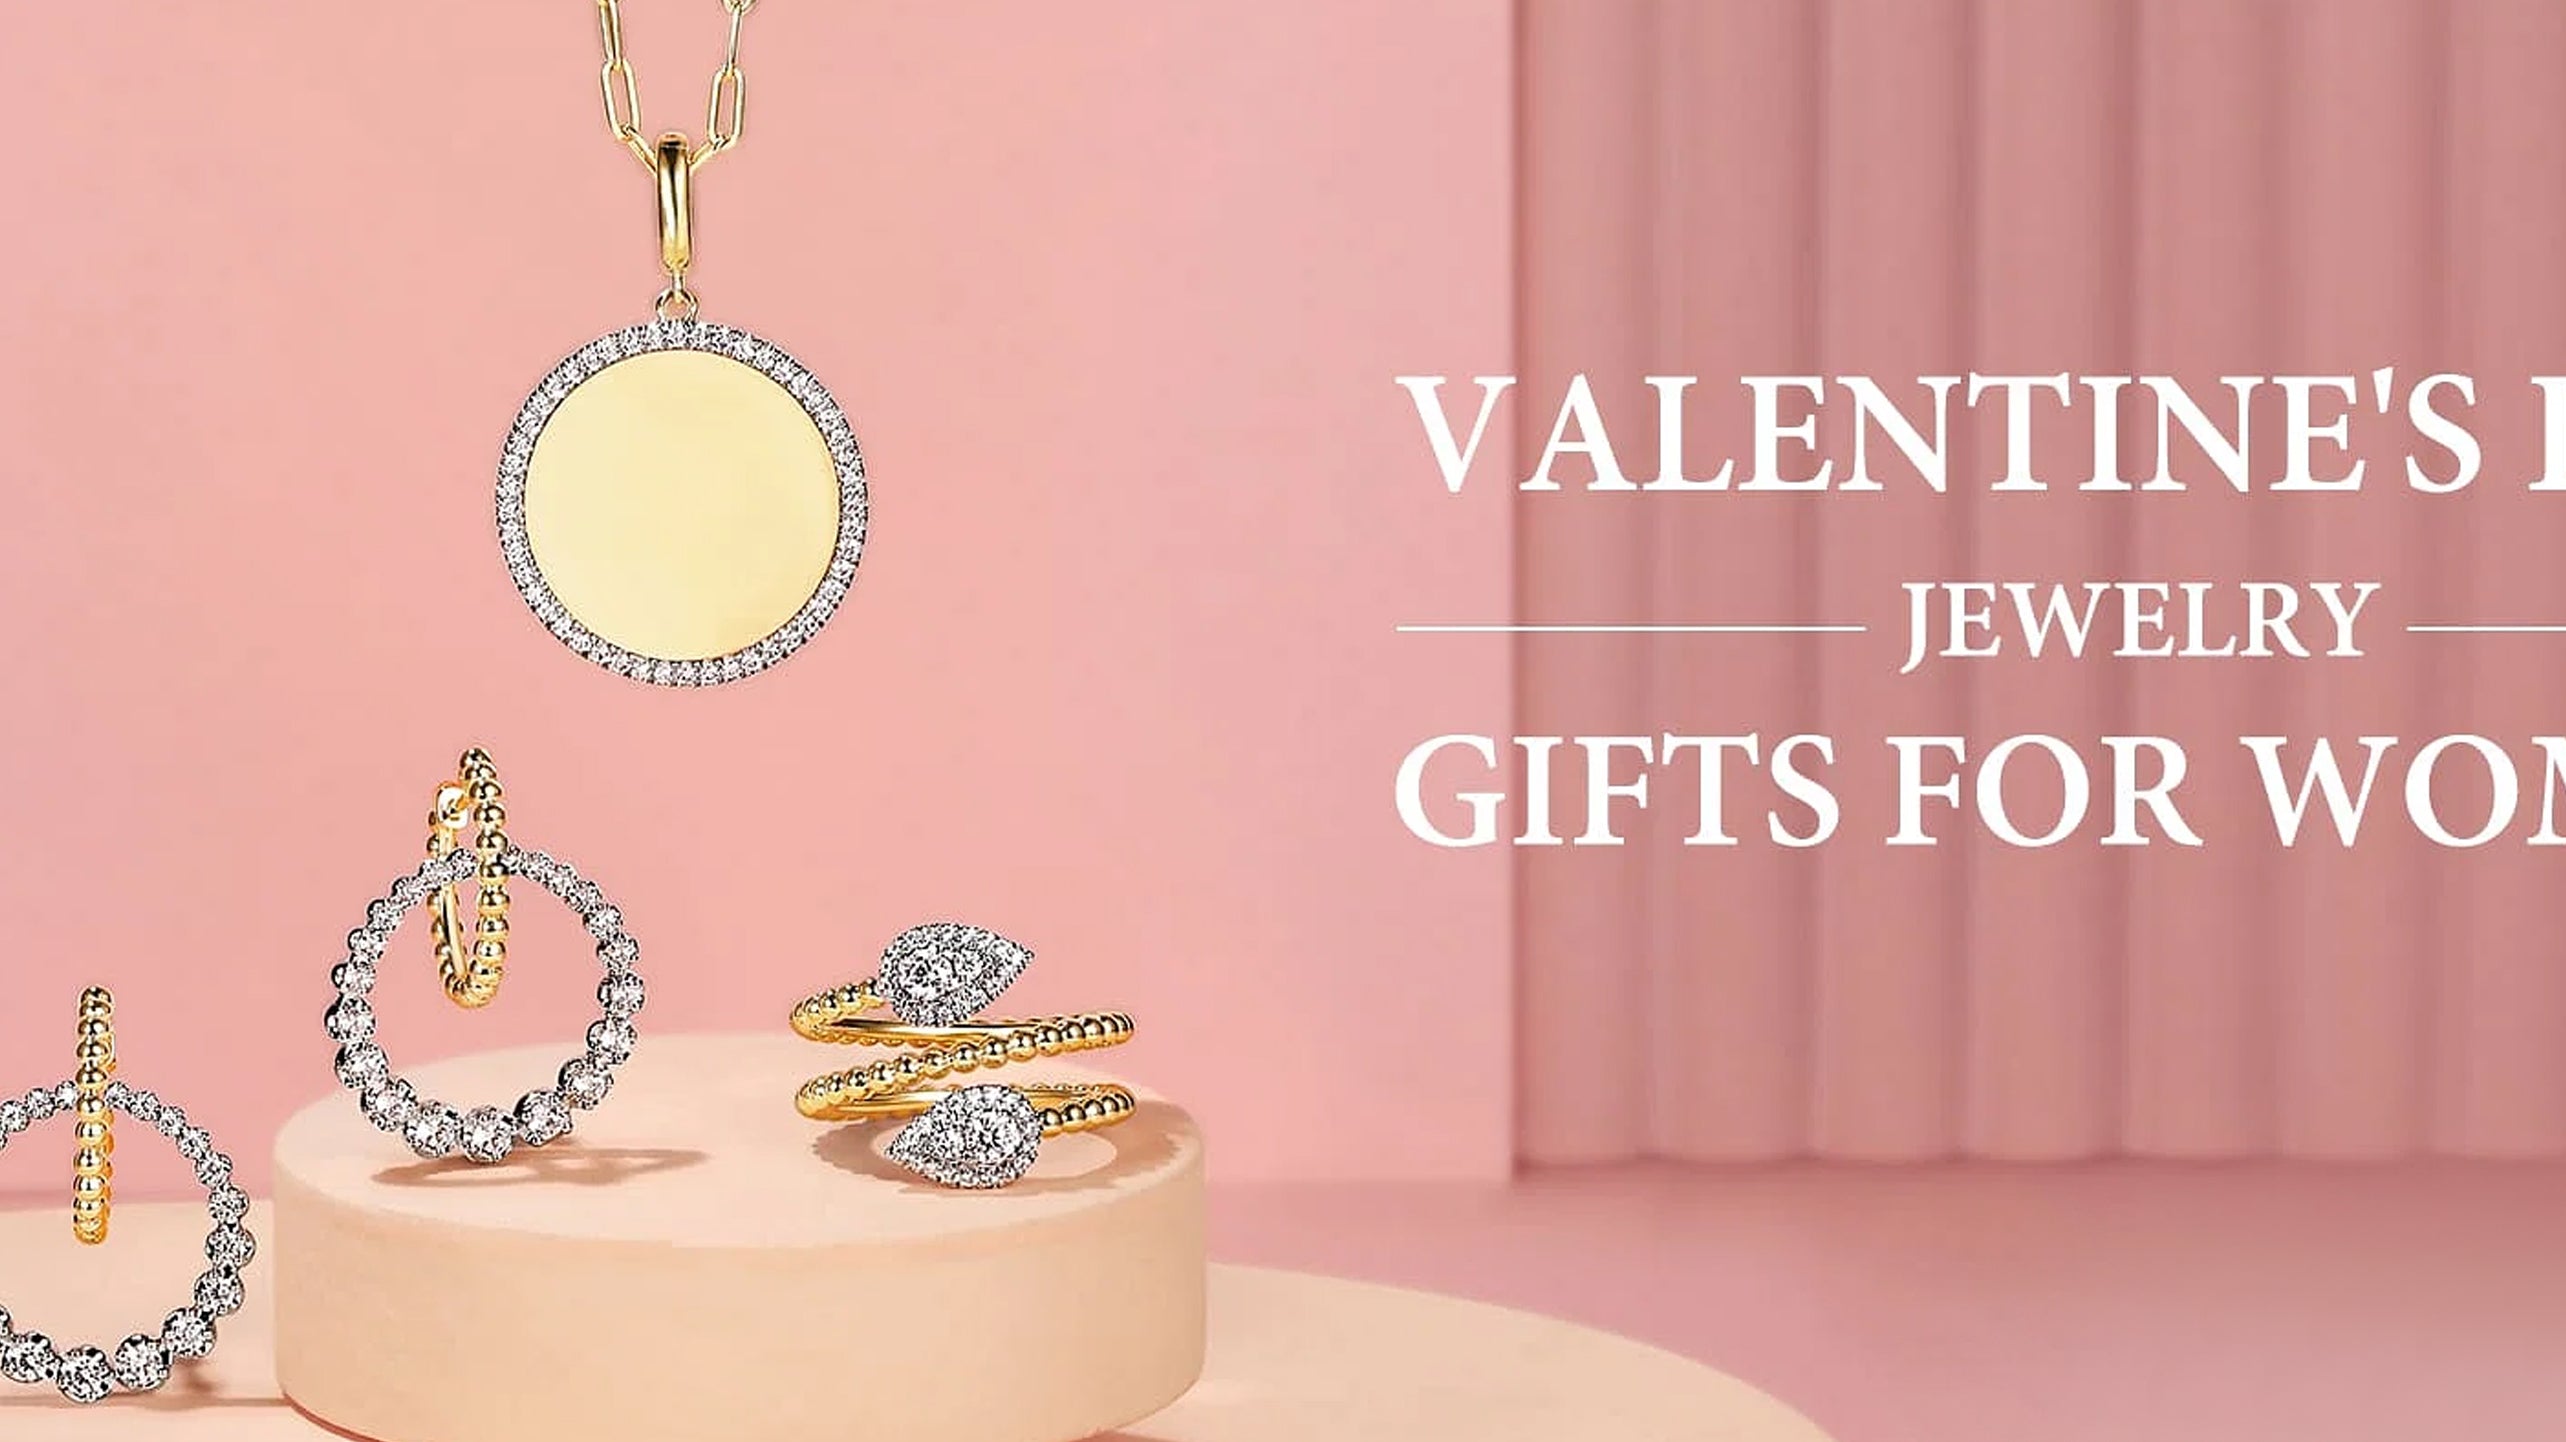 Choosing Stunning Valentine's Day Jewelry for Your Woman